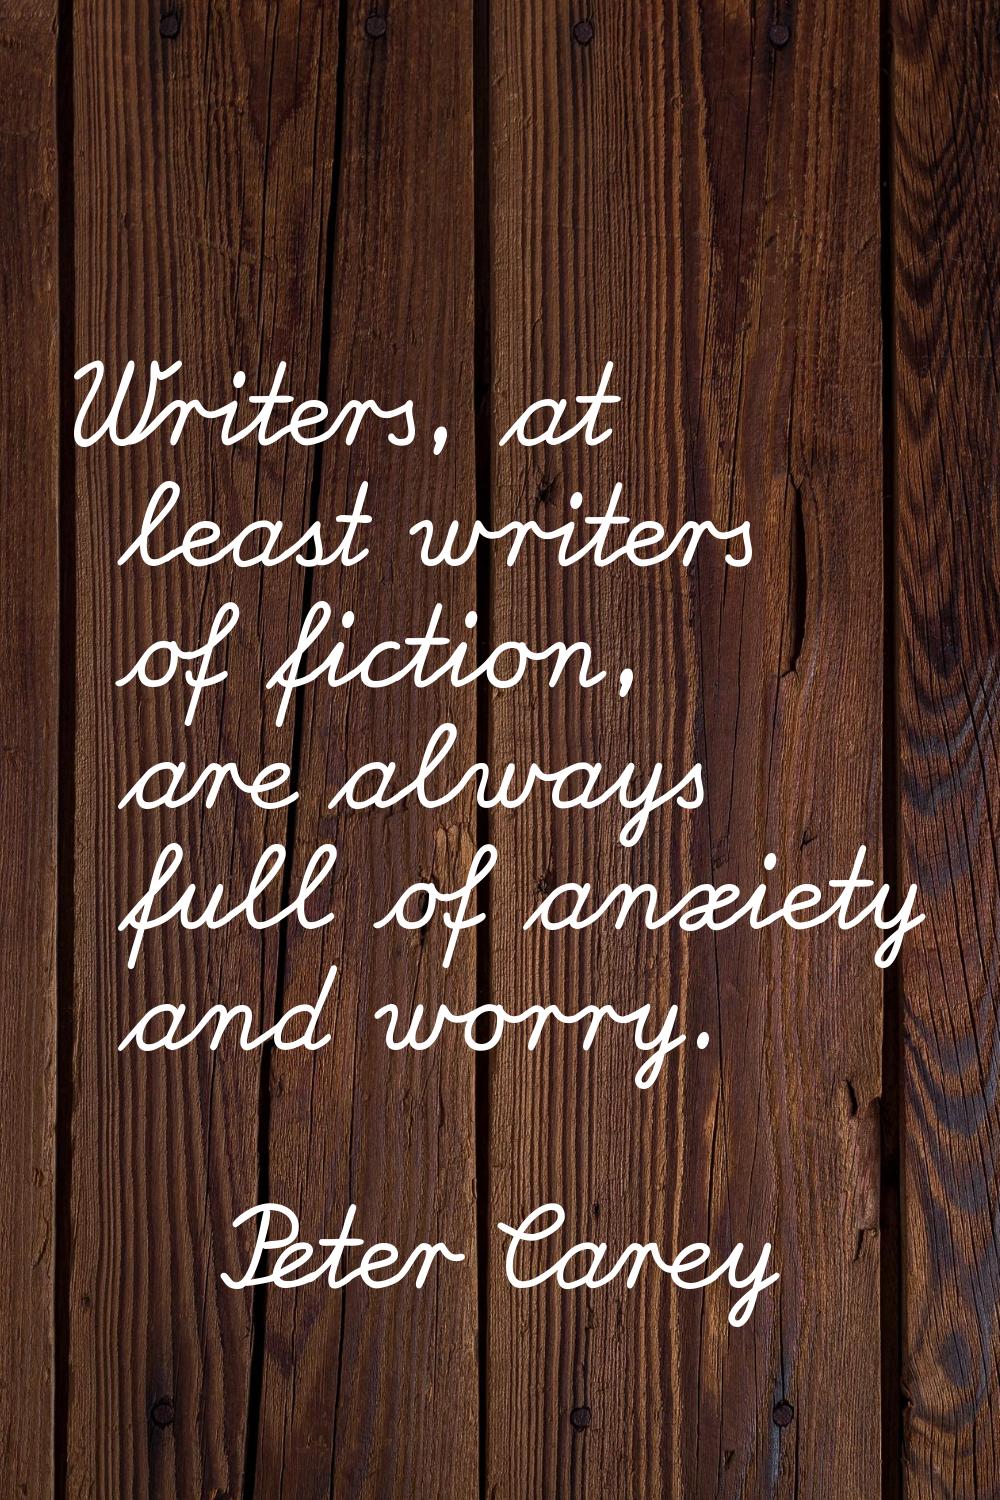 Writers, at least writers of fiction, are always full of anxiety and worry.